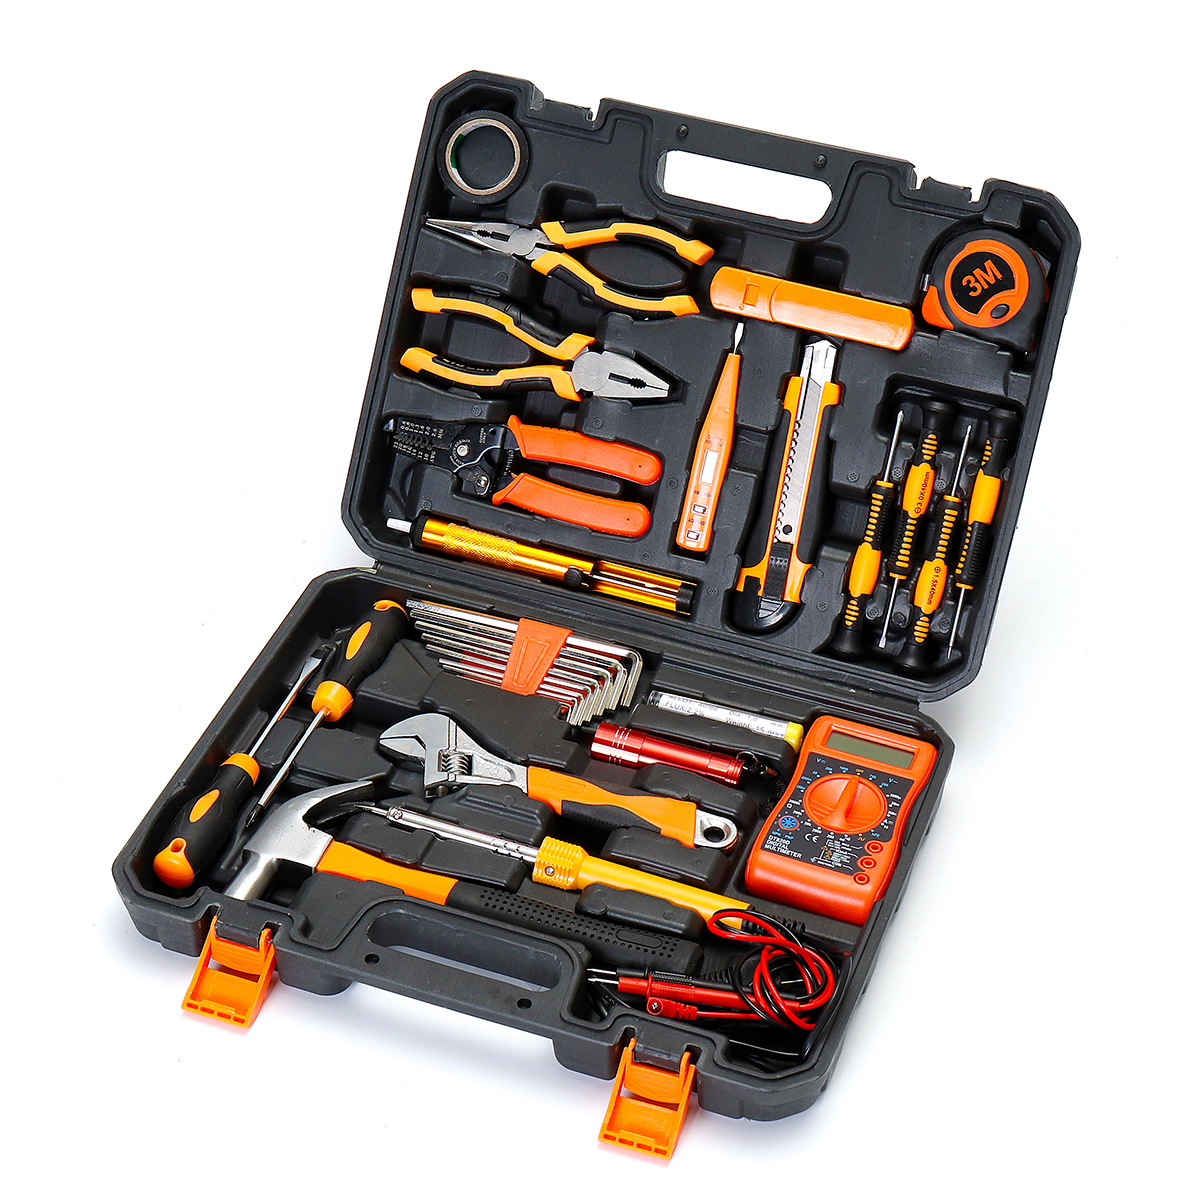 

33Pcs Multi-function Combination Tool Kit Multimeter Soldering Iron Wrench Screwdriver Hammer Repair Tools Set With Storage Case